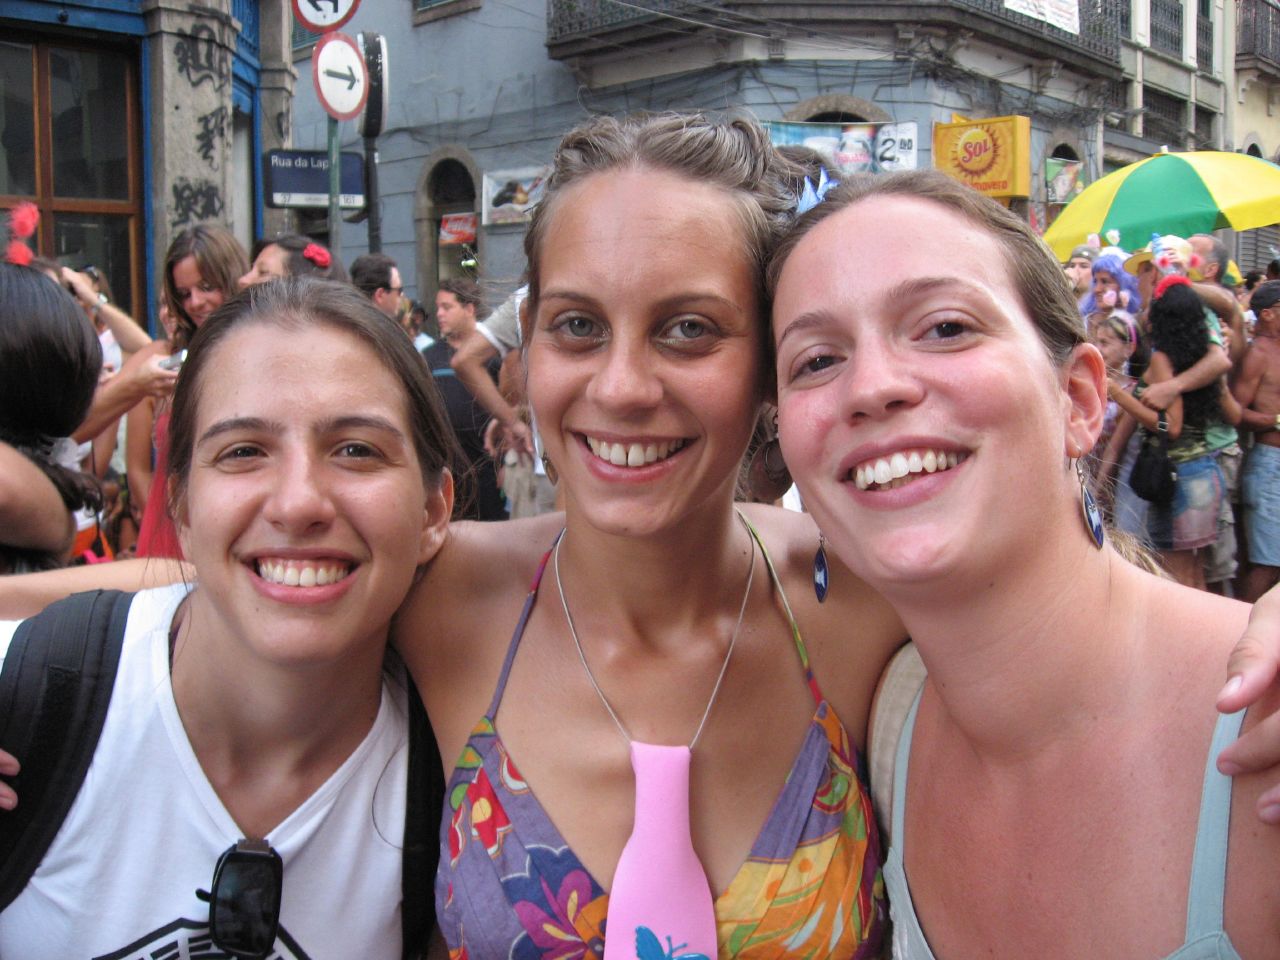 three women who are standing together at the festival